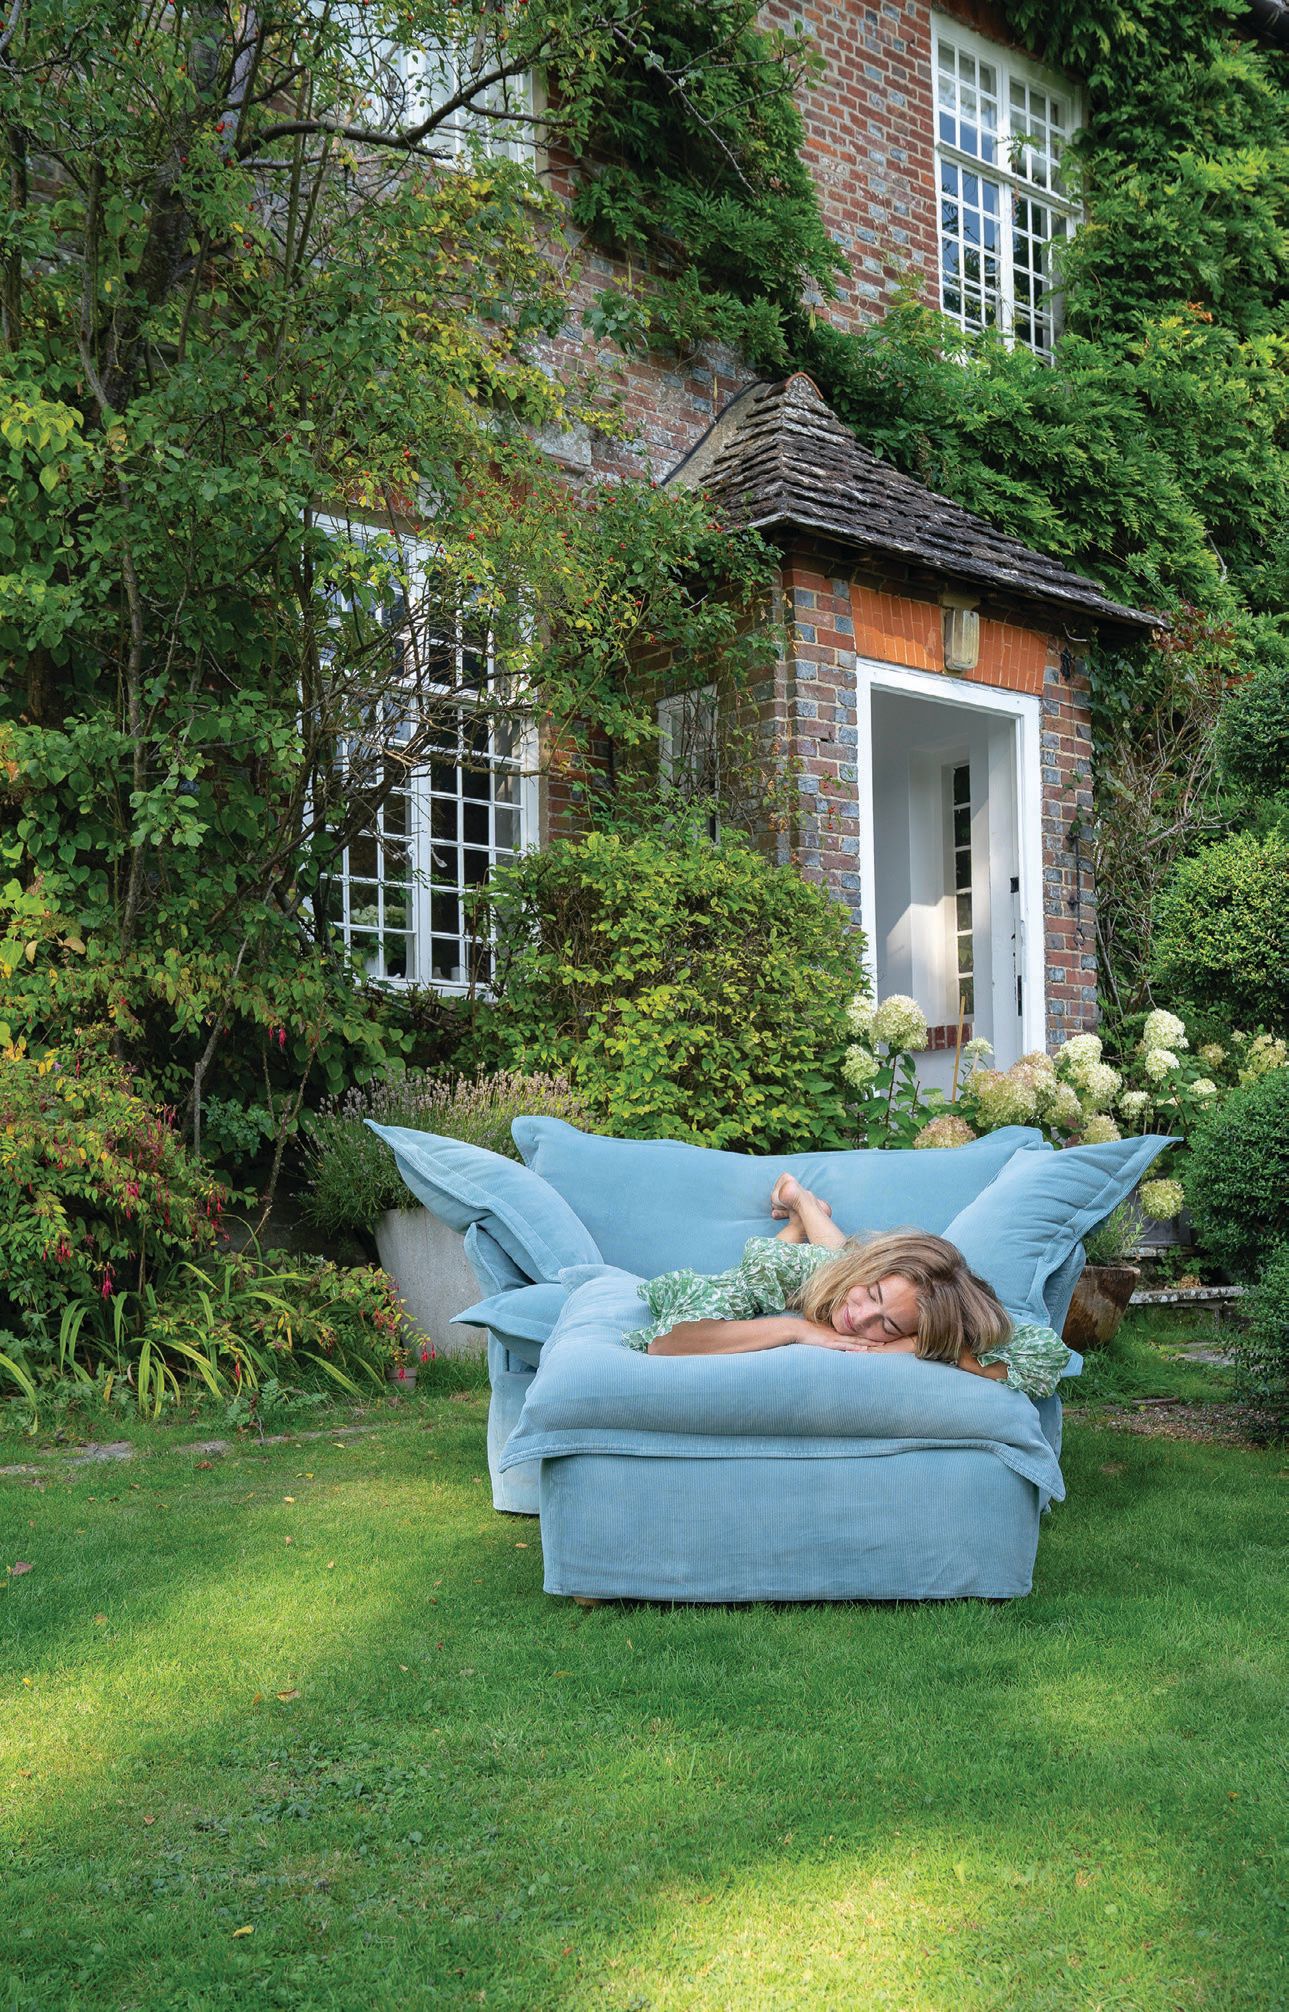 Allow the Song range love seat sofa outfitted in blue corduroy to transport you to the English countryside. PHOTO COURTESY OF MARKER&SON